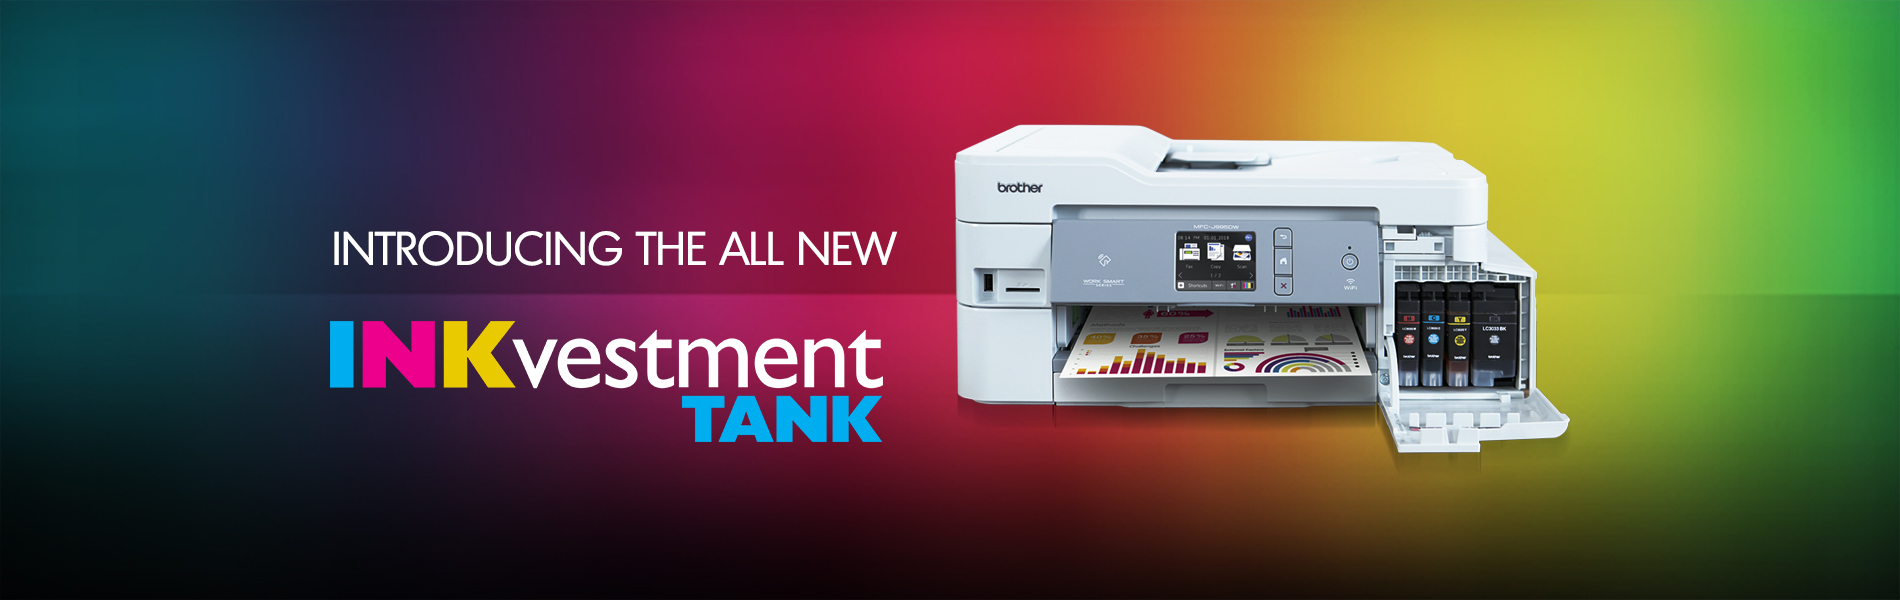 Introducing the all new INKvestment TANK